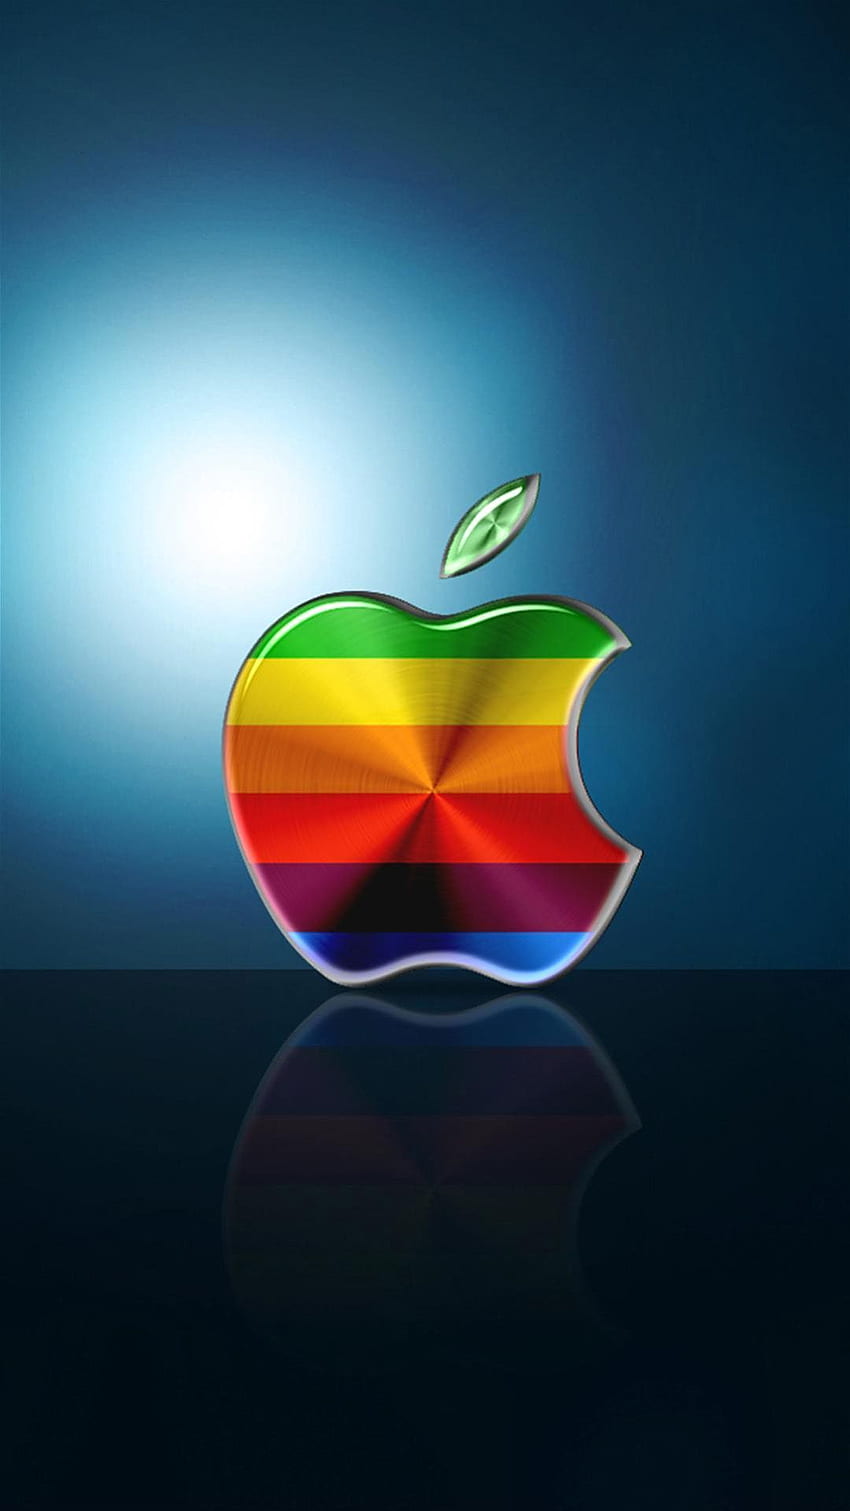 Colorful Apple Logo Background for iPhone, Cool 3D 4 HD phone wallpaper